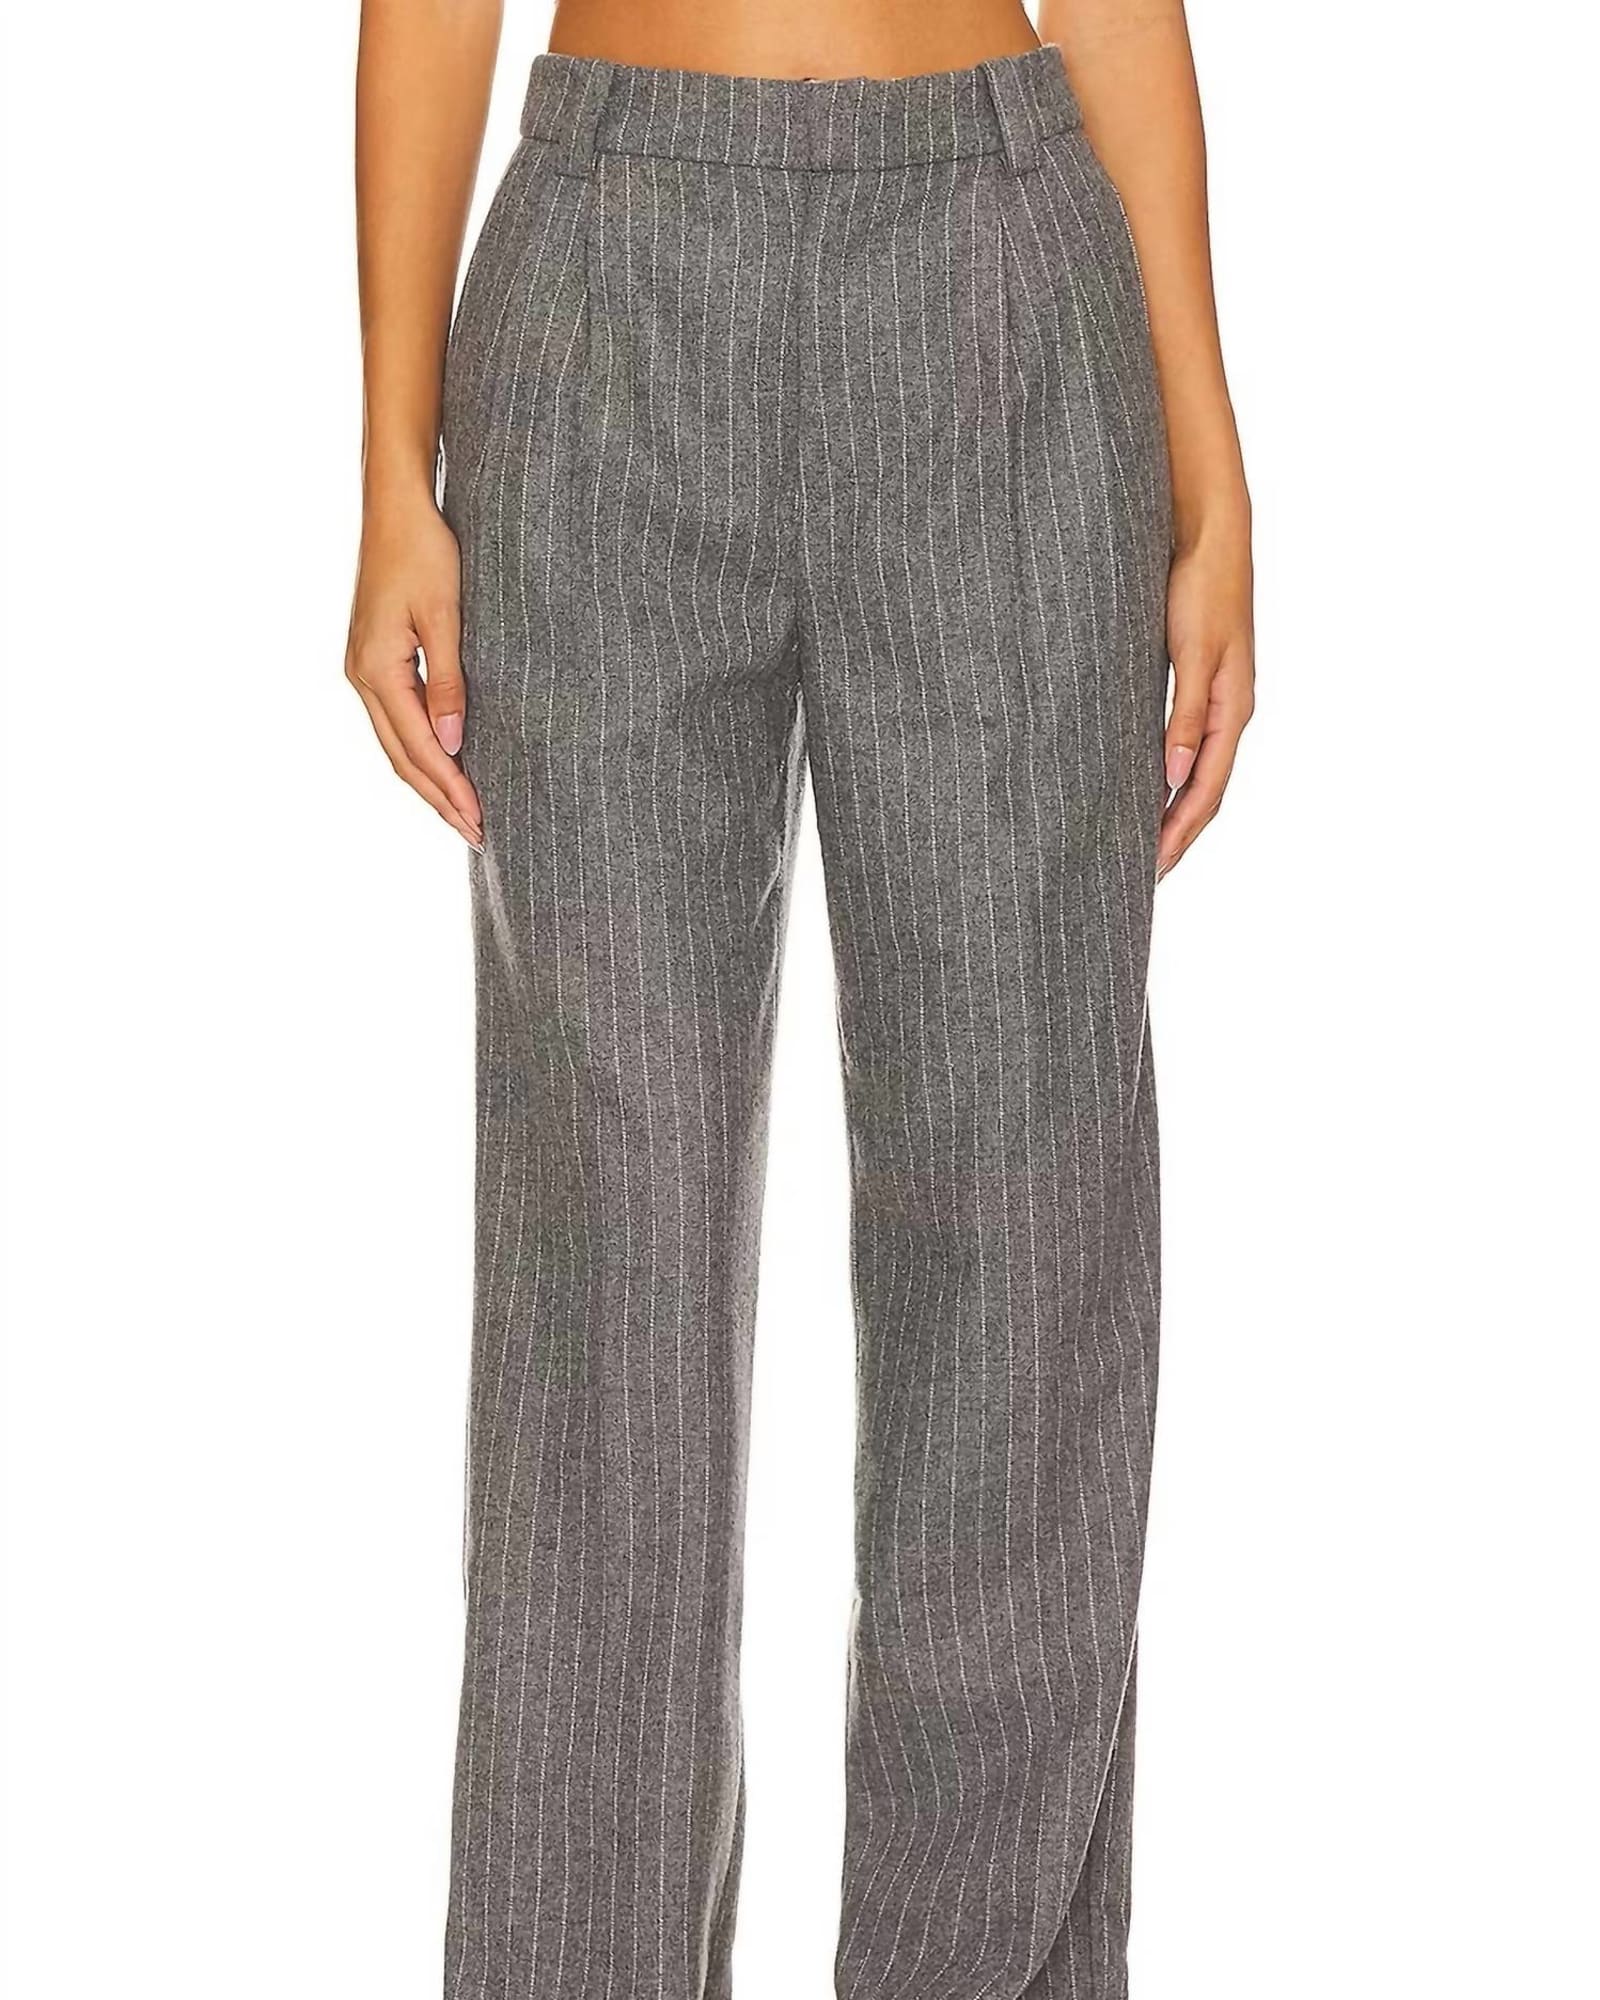 Roen Pant In Grey And White Pinstripe | Grey And White Pinstripe